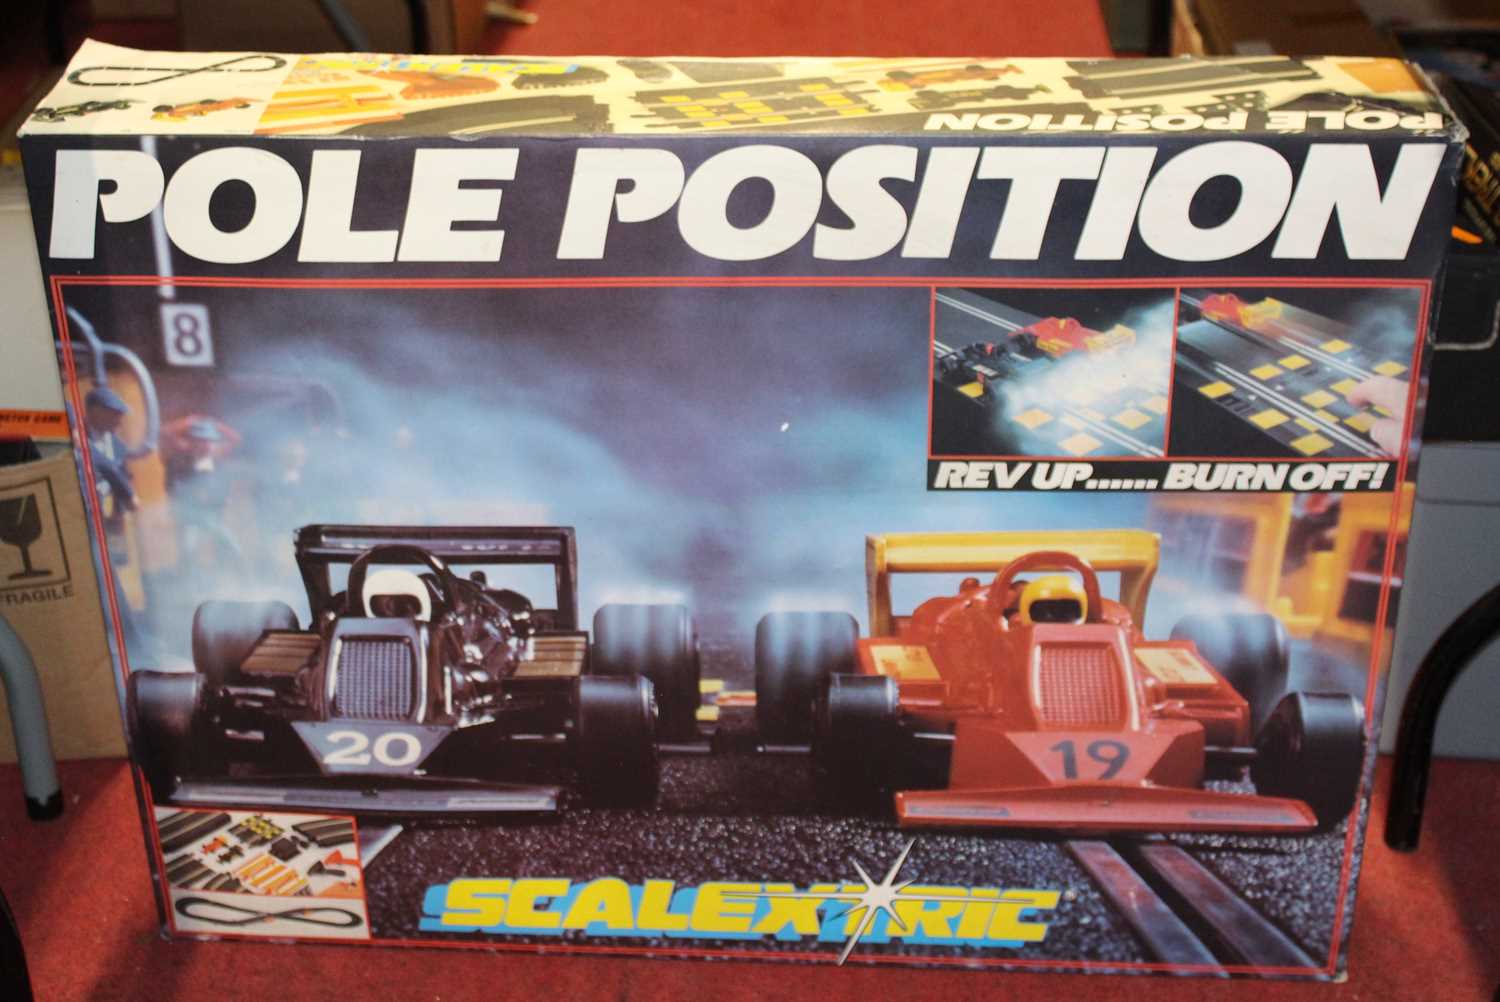 A Scalextric No. 370/1526 Pole Position slot racing set, housed in the original polystyrene packed - Bild 3 aus 3